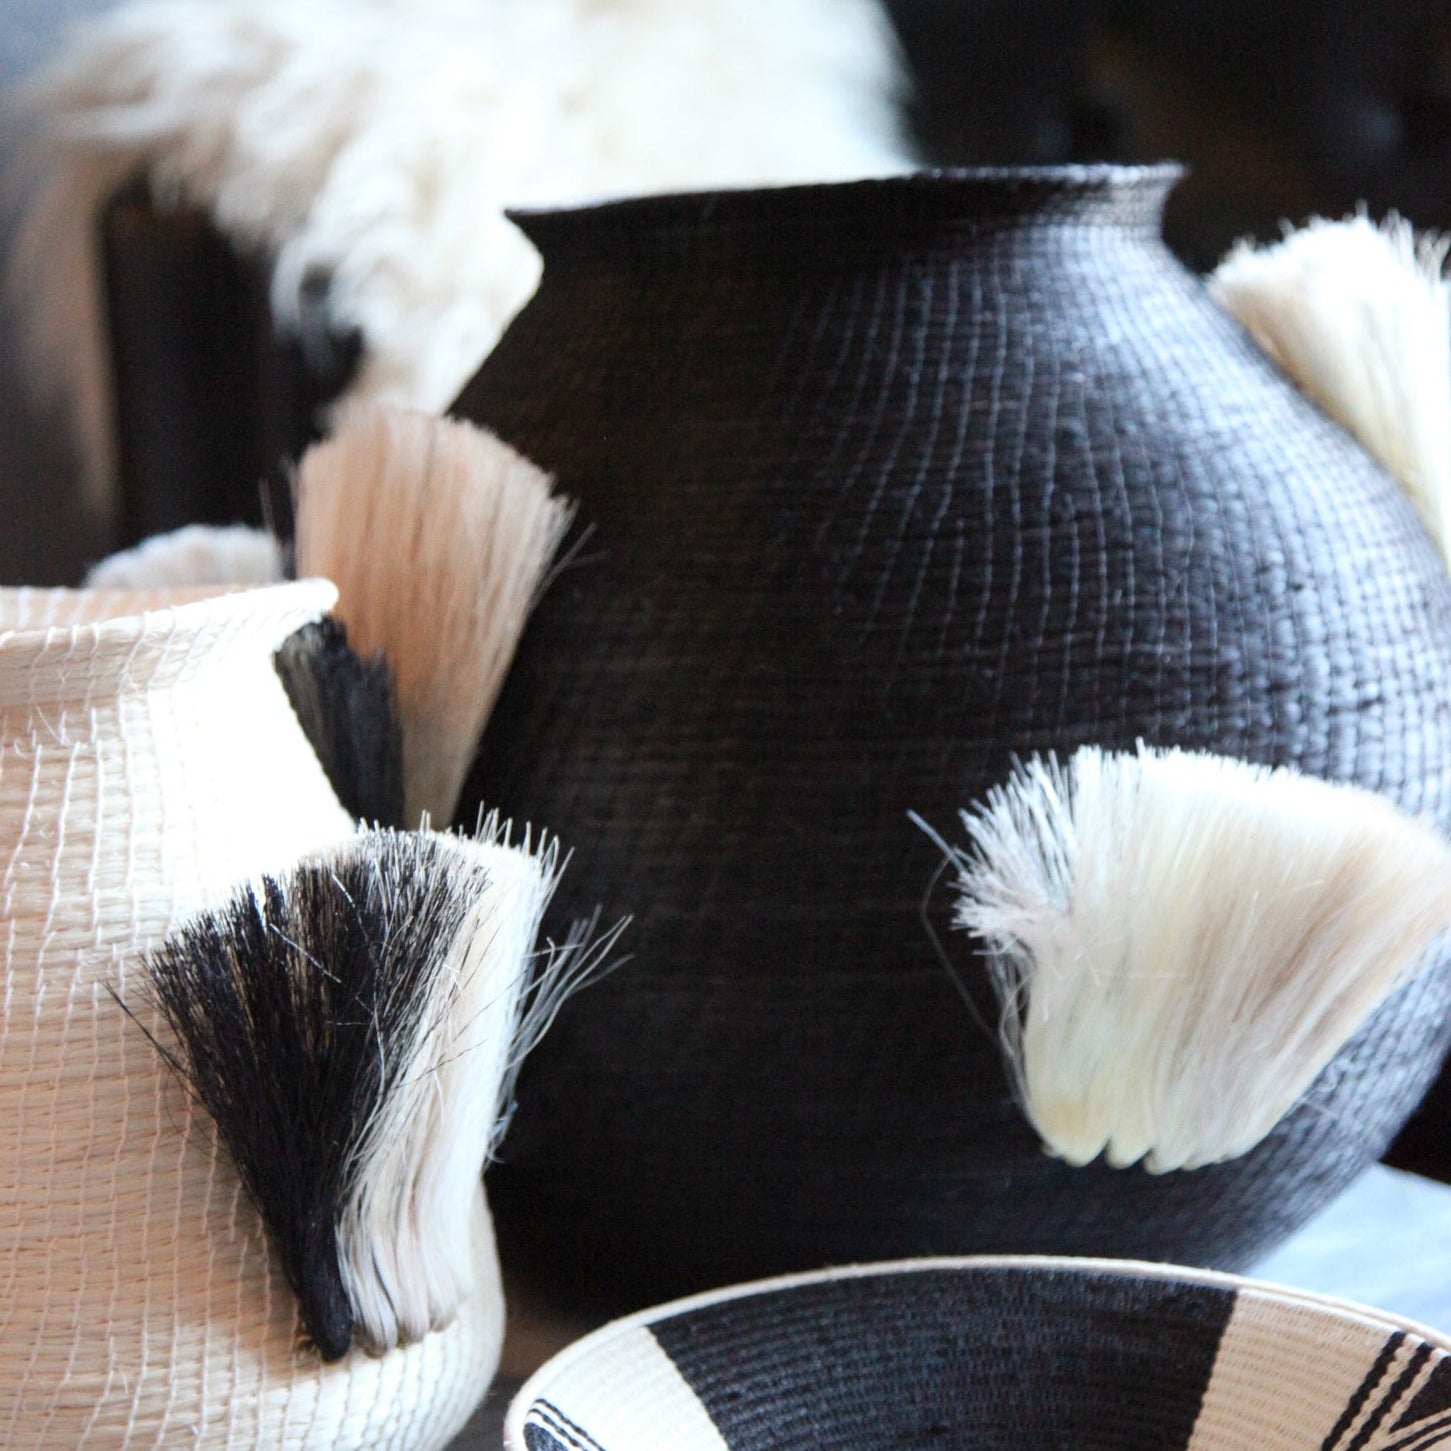 Fanned Out Large Bulbous Vase in Black/White by Charlie Sprout. Handmade in Swaziland, these unique and bold decorative accents support female artisans and are bold additions to any room. Swazi baskets are the most labor intensive of all the African baskets, taking between 30-80 hours to make each piece.